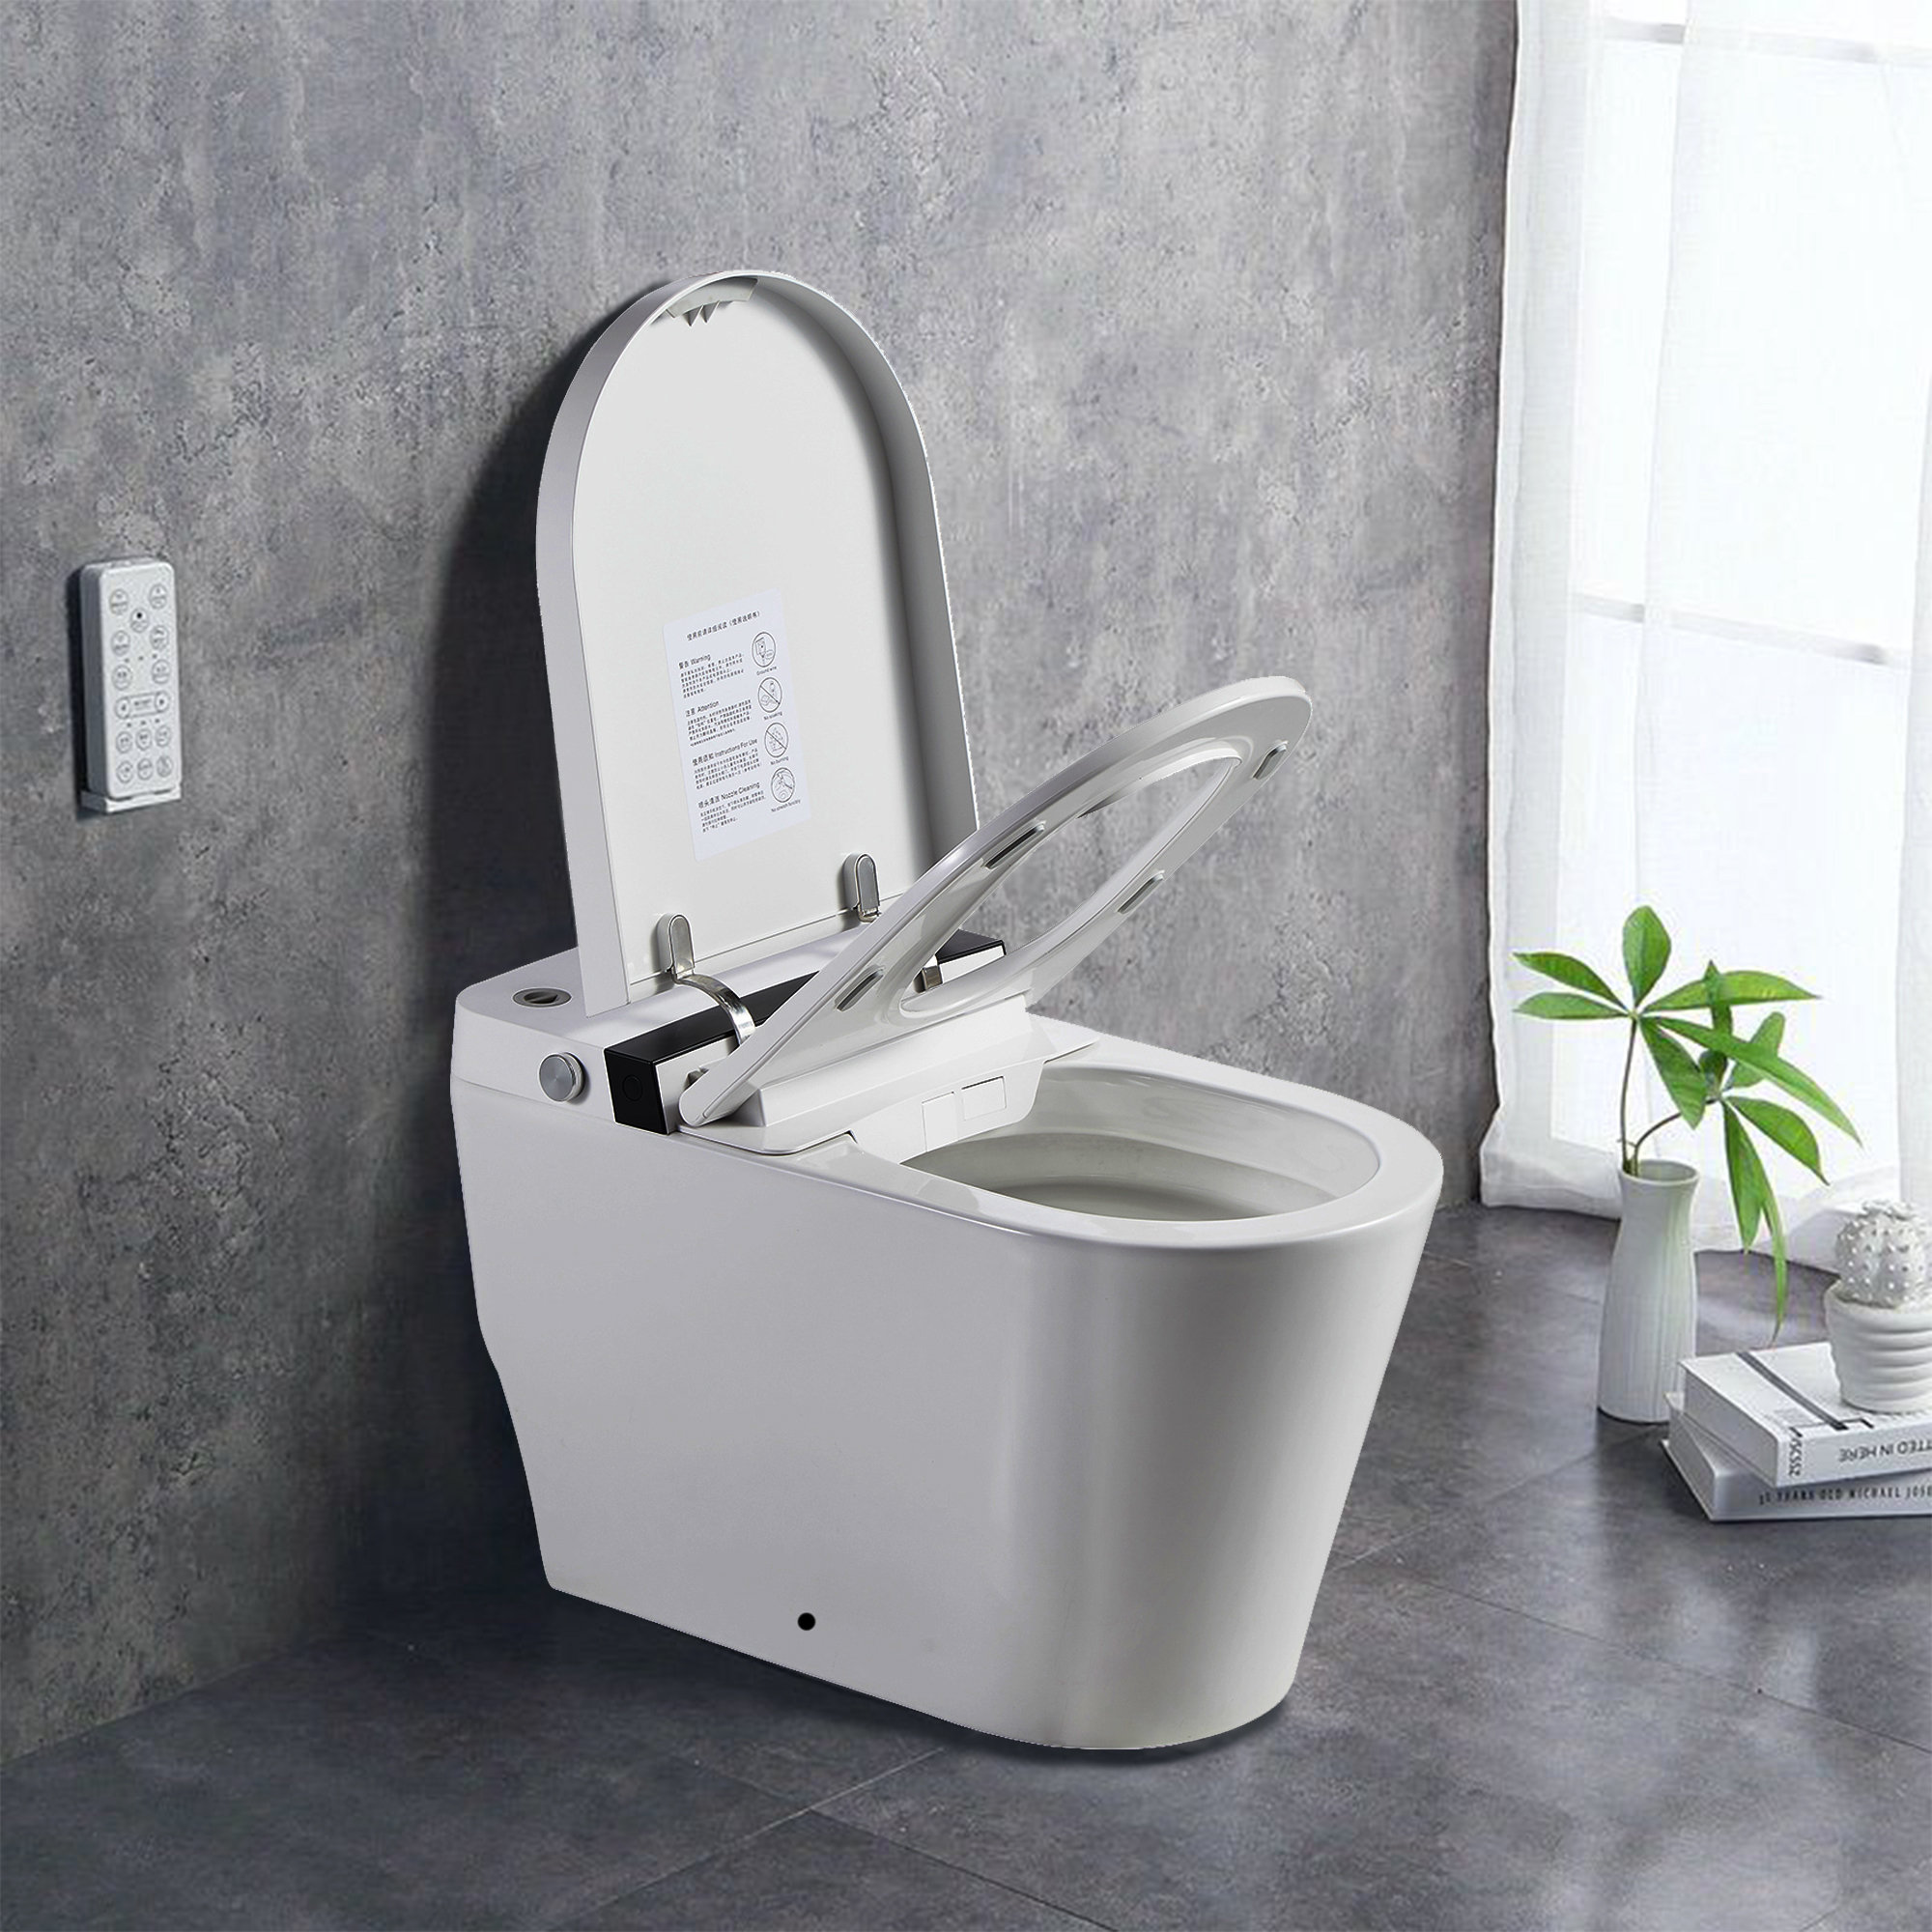 Wall-Mounted Toilets: What You Need to Know